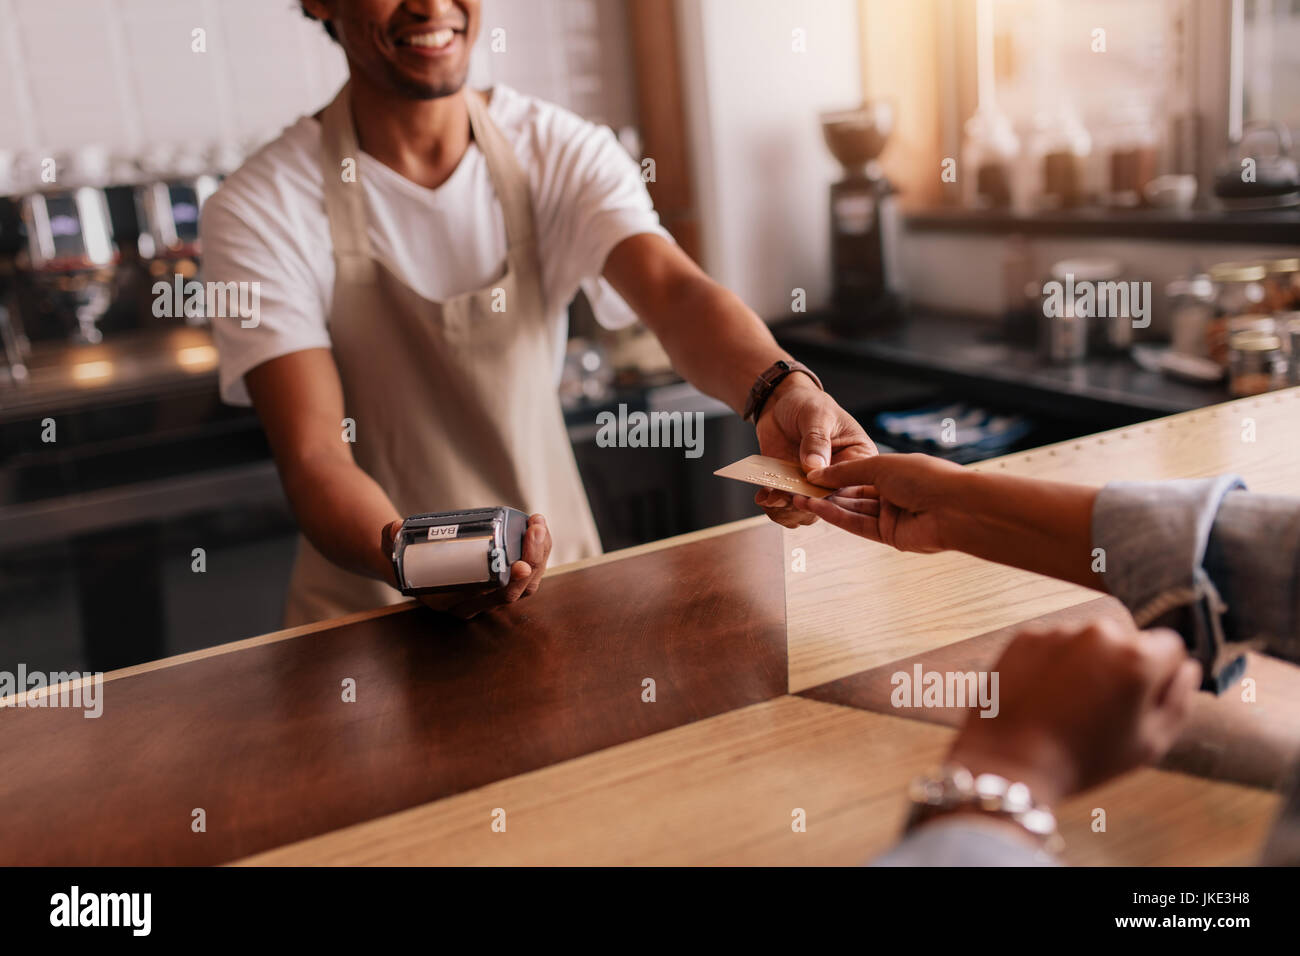 Cropped shot of customer giving credit card to male barista at cafe checkout counter. Customer paying through credit card at coffee shop. Stock Photo